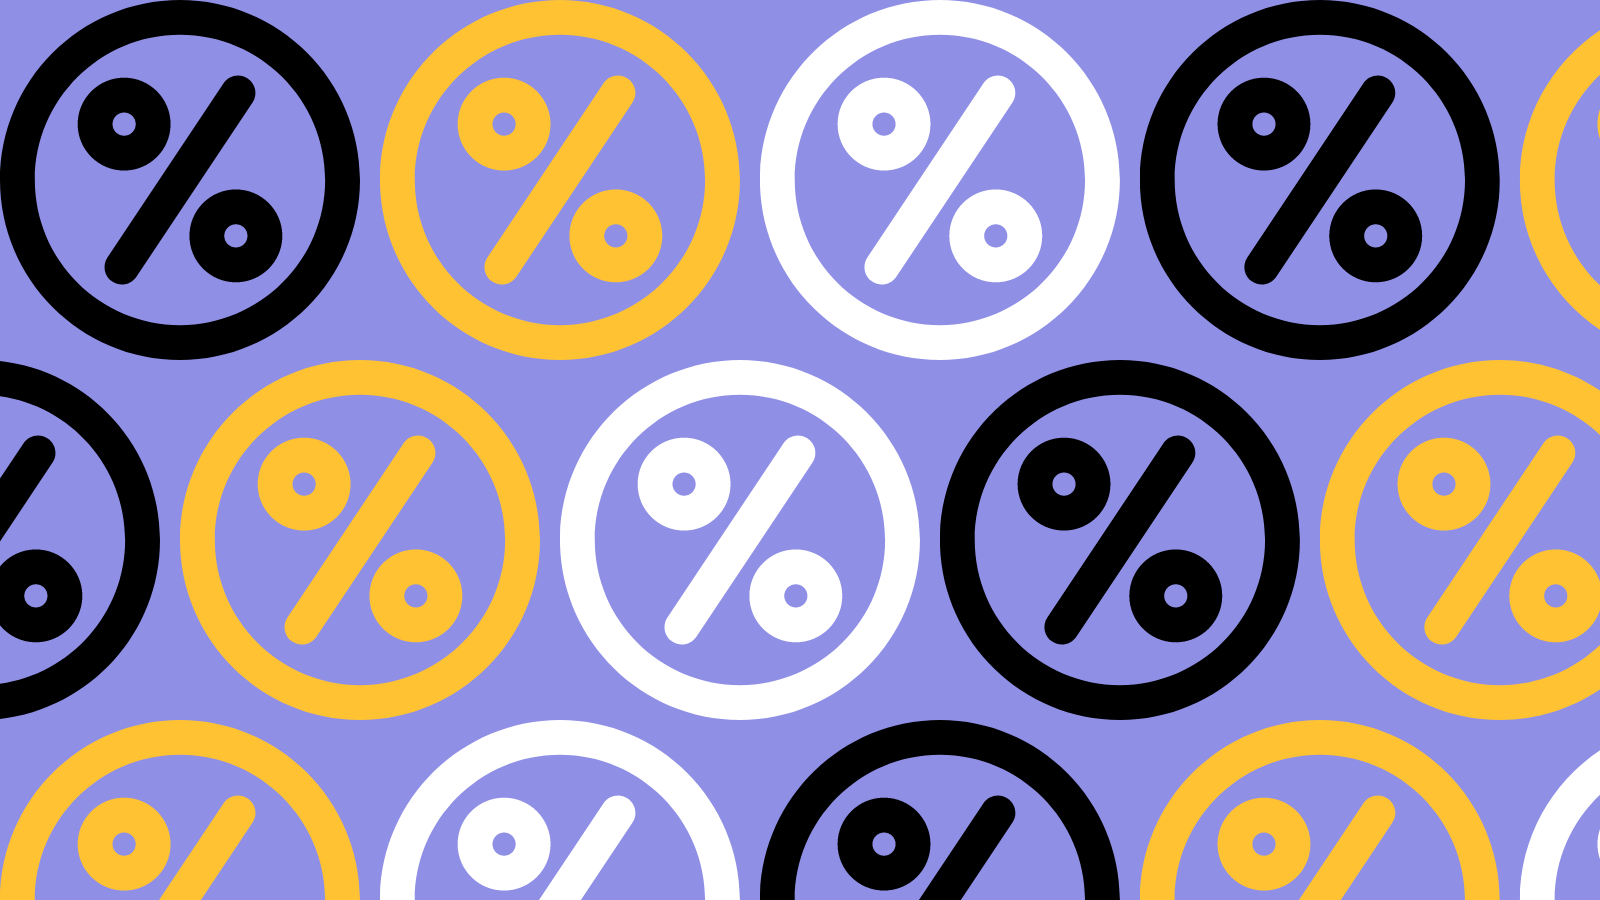 Three rows of percentage signs in circles